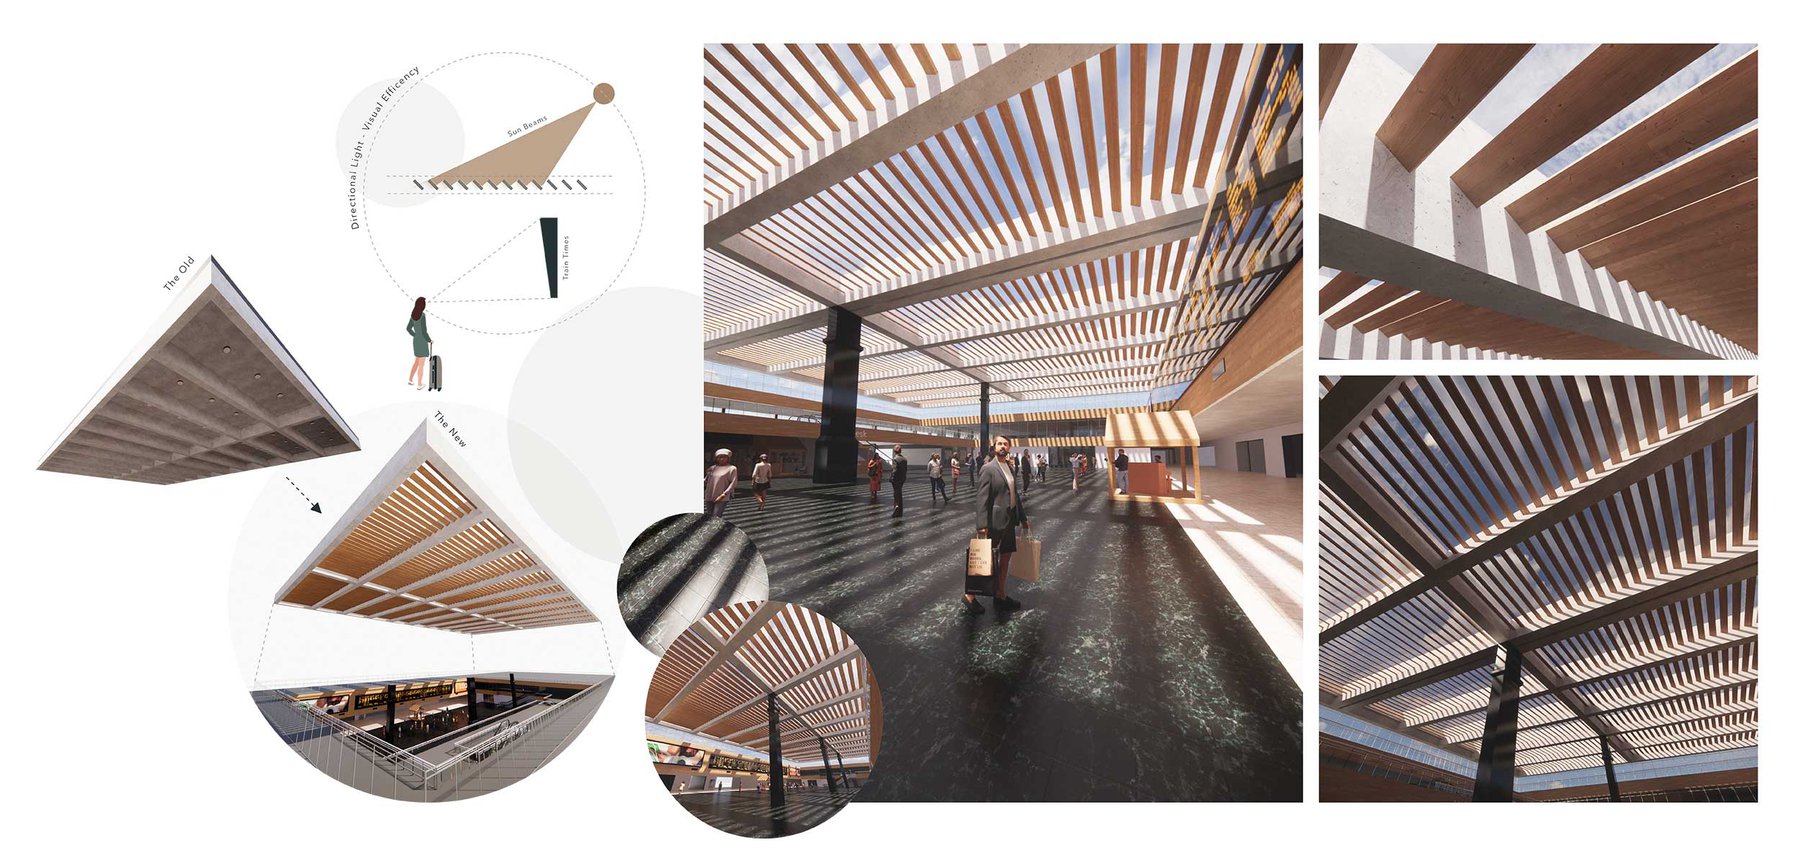 Images of a slattered ceiling detail for Euston Station within the concourse